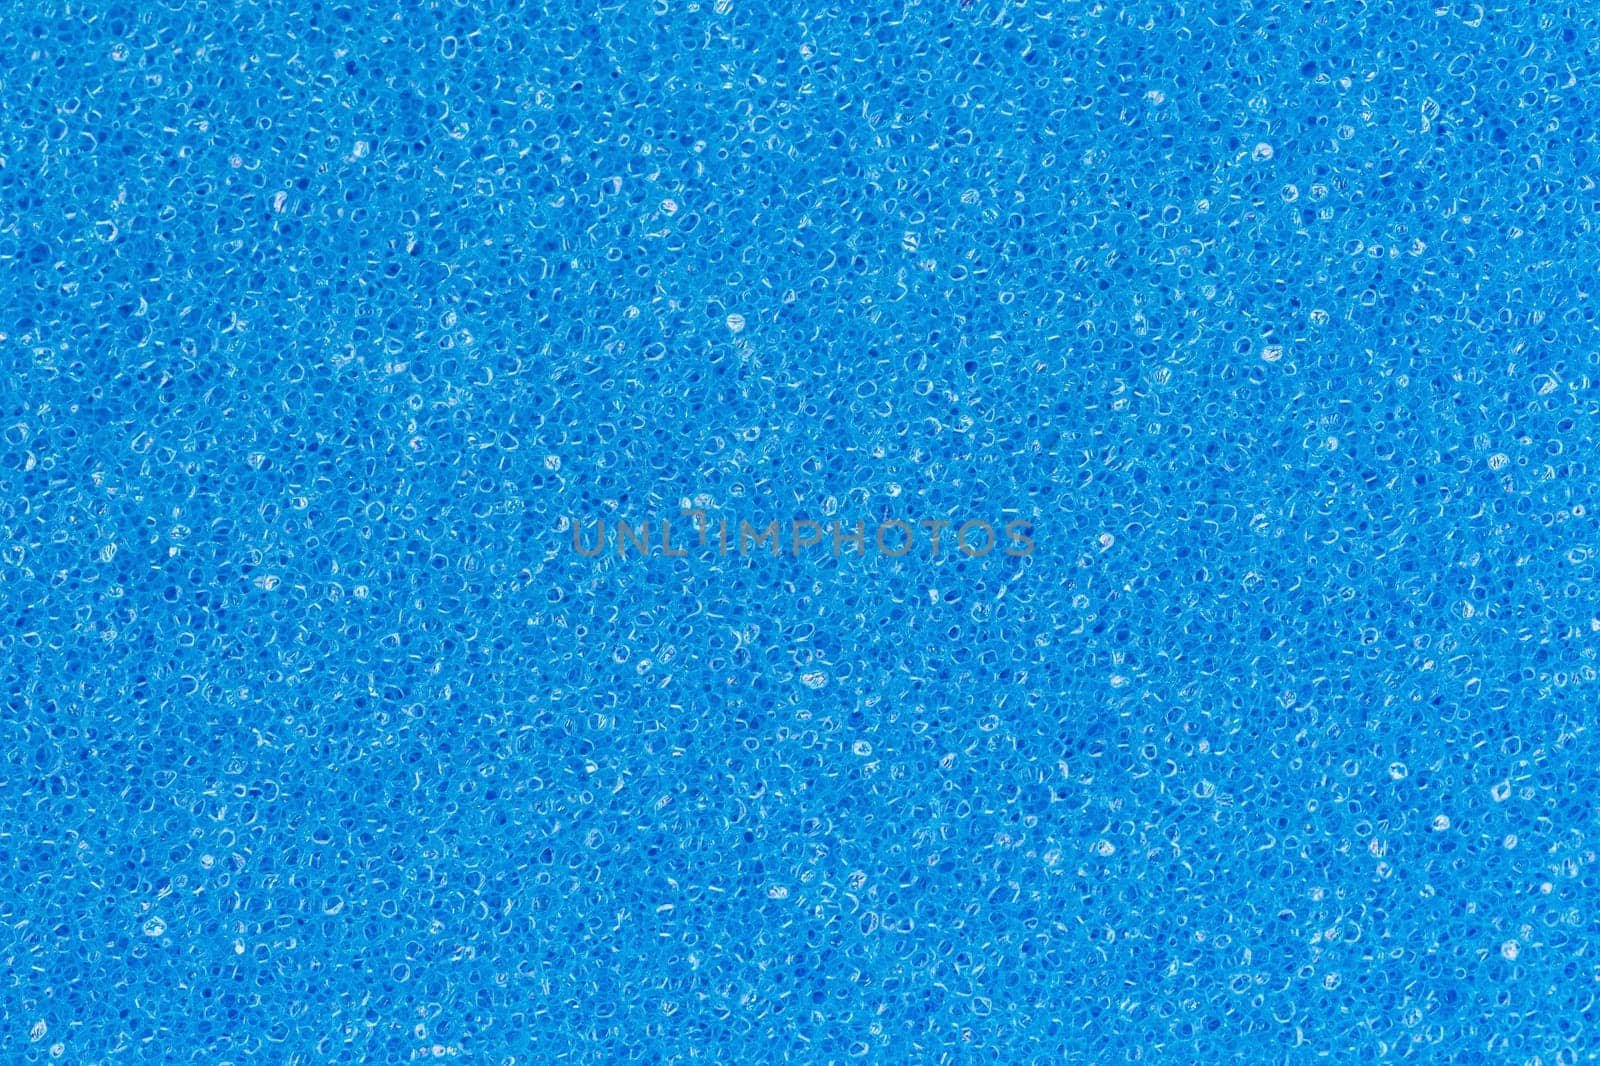 Foam sponge porous texture background deep sky blue color. Extreme close-up view of unique detail abstract synthetic material. Horizontal composition for design, colored decoration backdrop